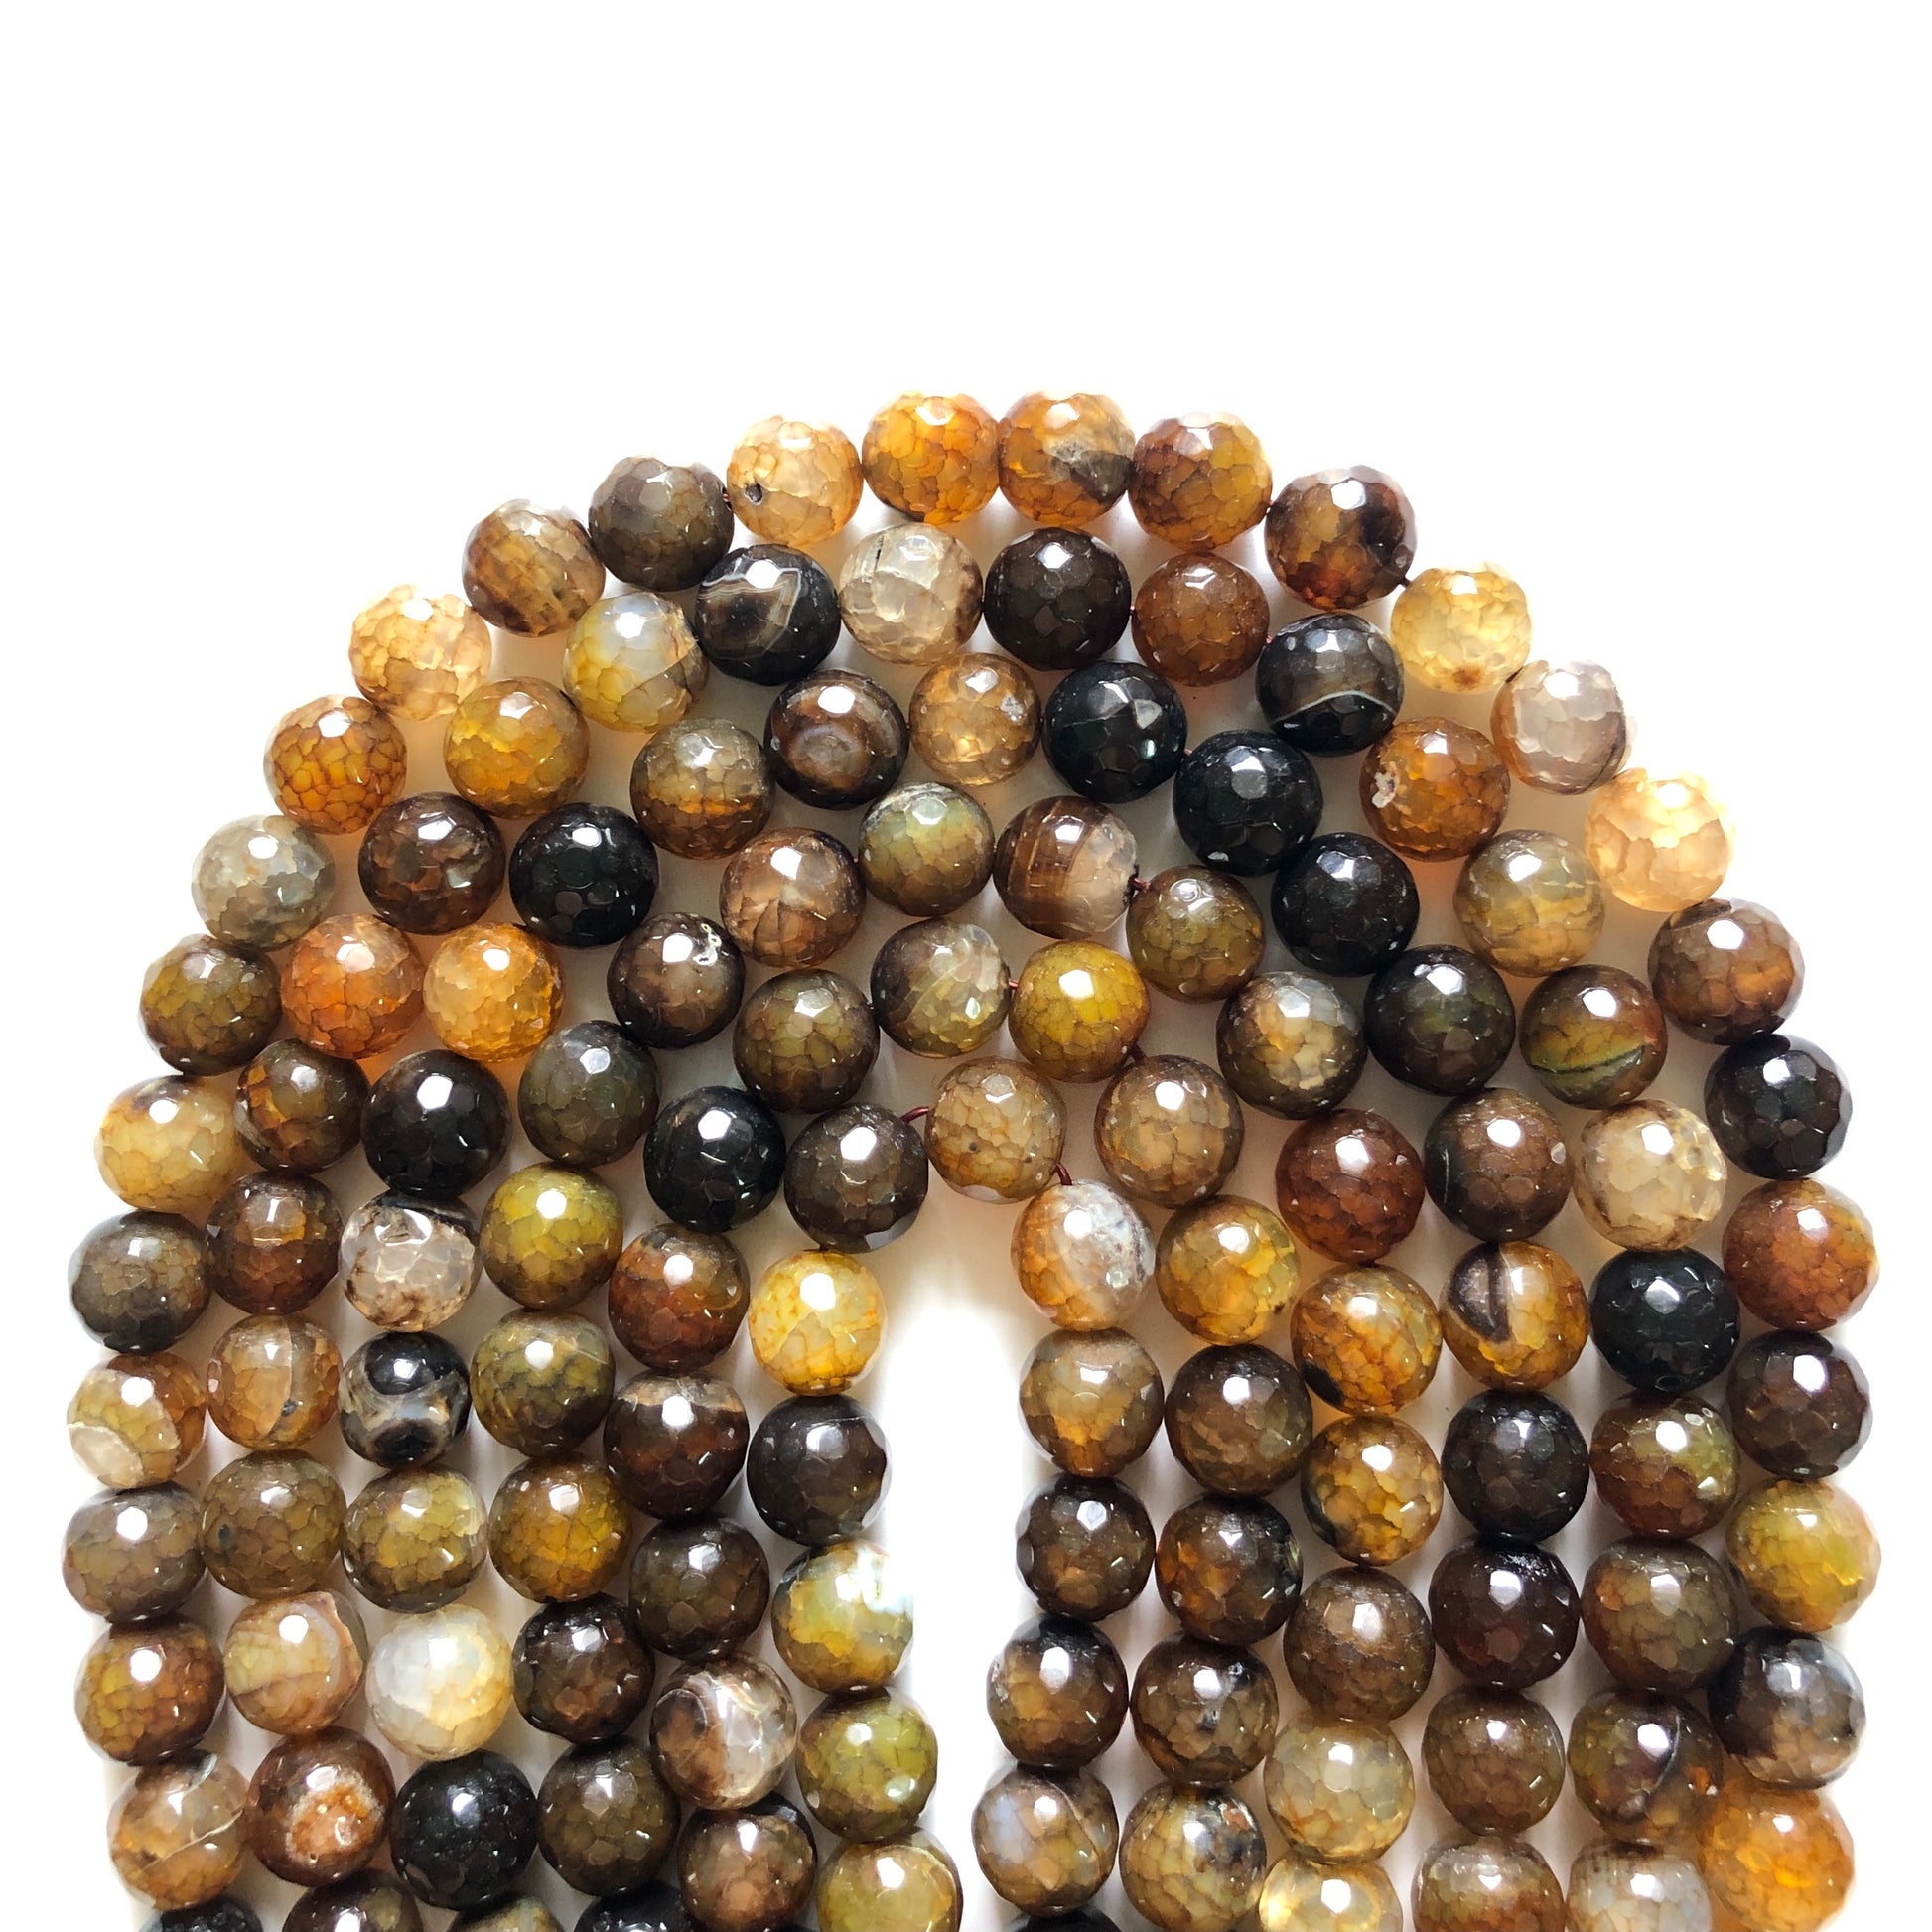 2 Strands/lot 12mm Brown Faceted Dragon Agate Stone Beads Stone Beads 12mm Stone Beads Faceted Agate Beads Charms Beads Beyond